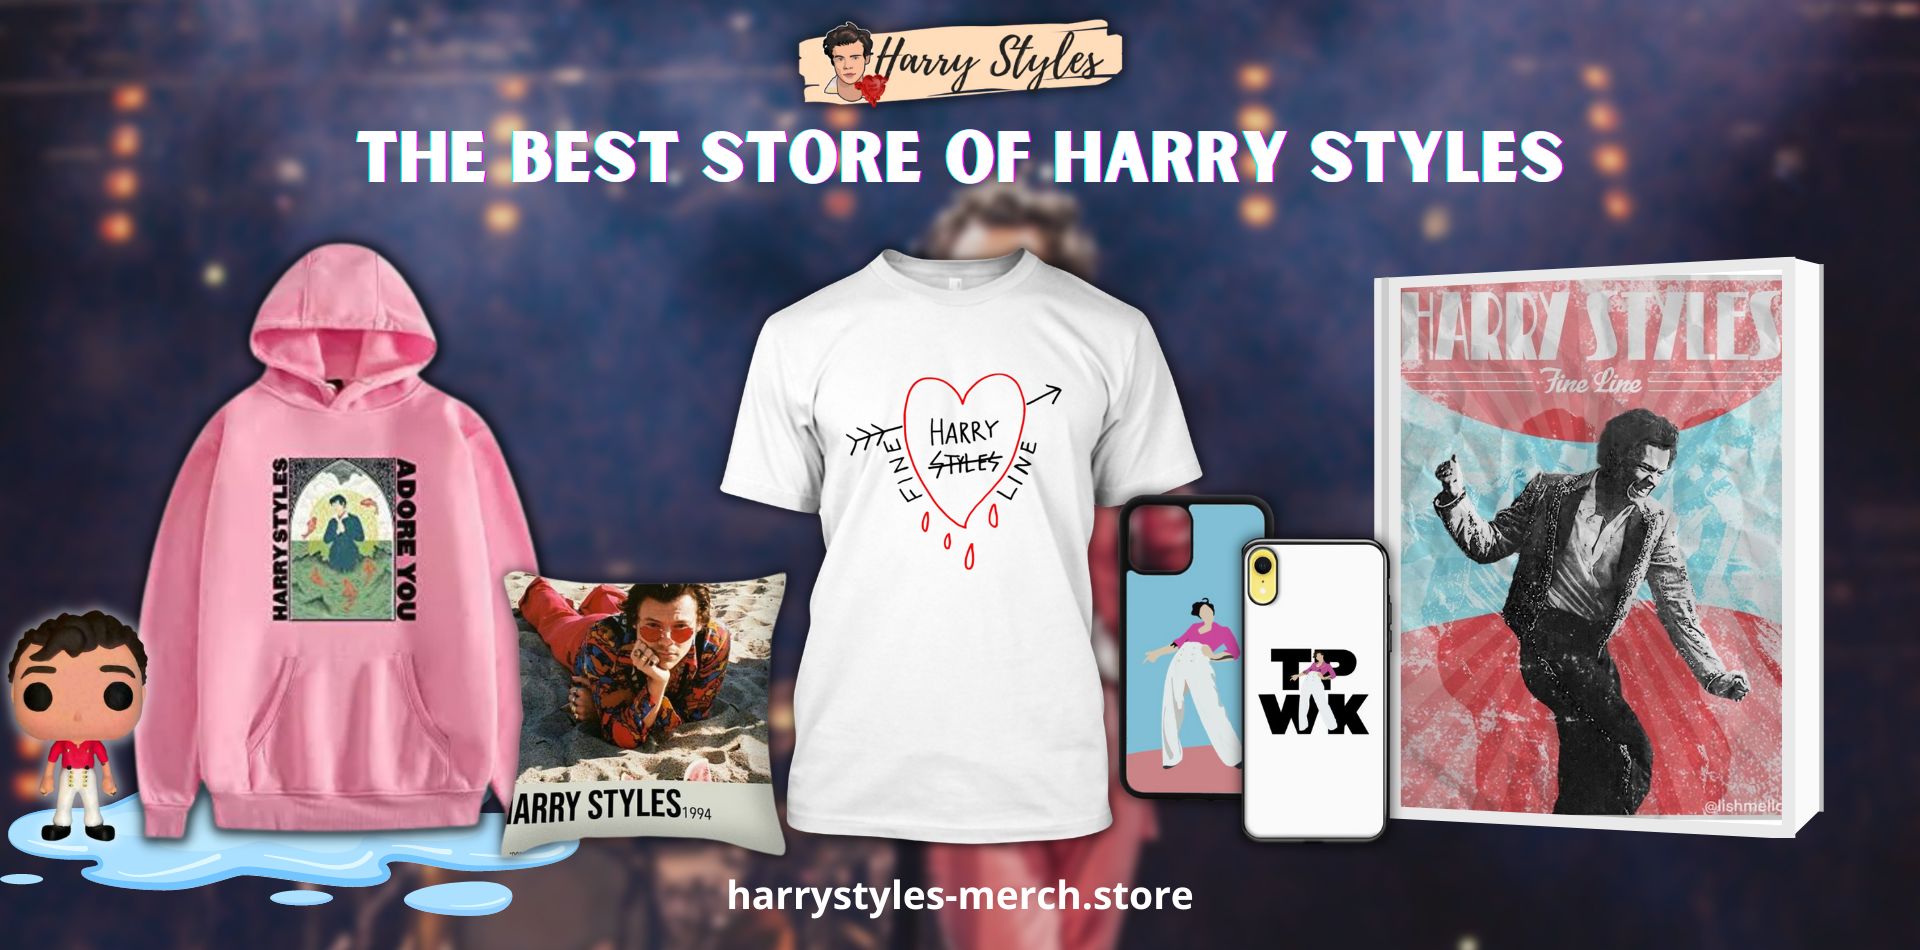 Harry Styles love on tour Official Merch